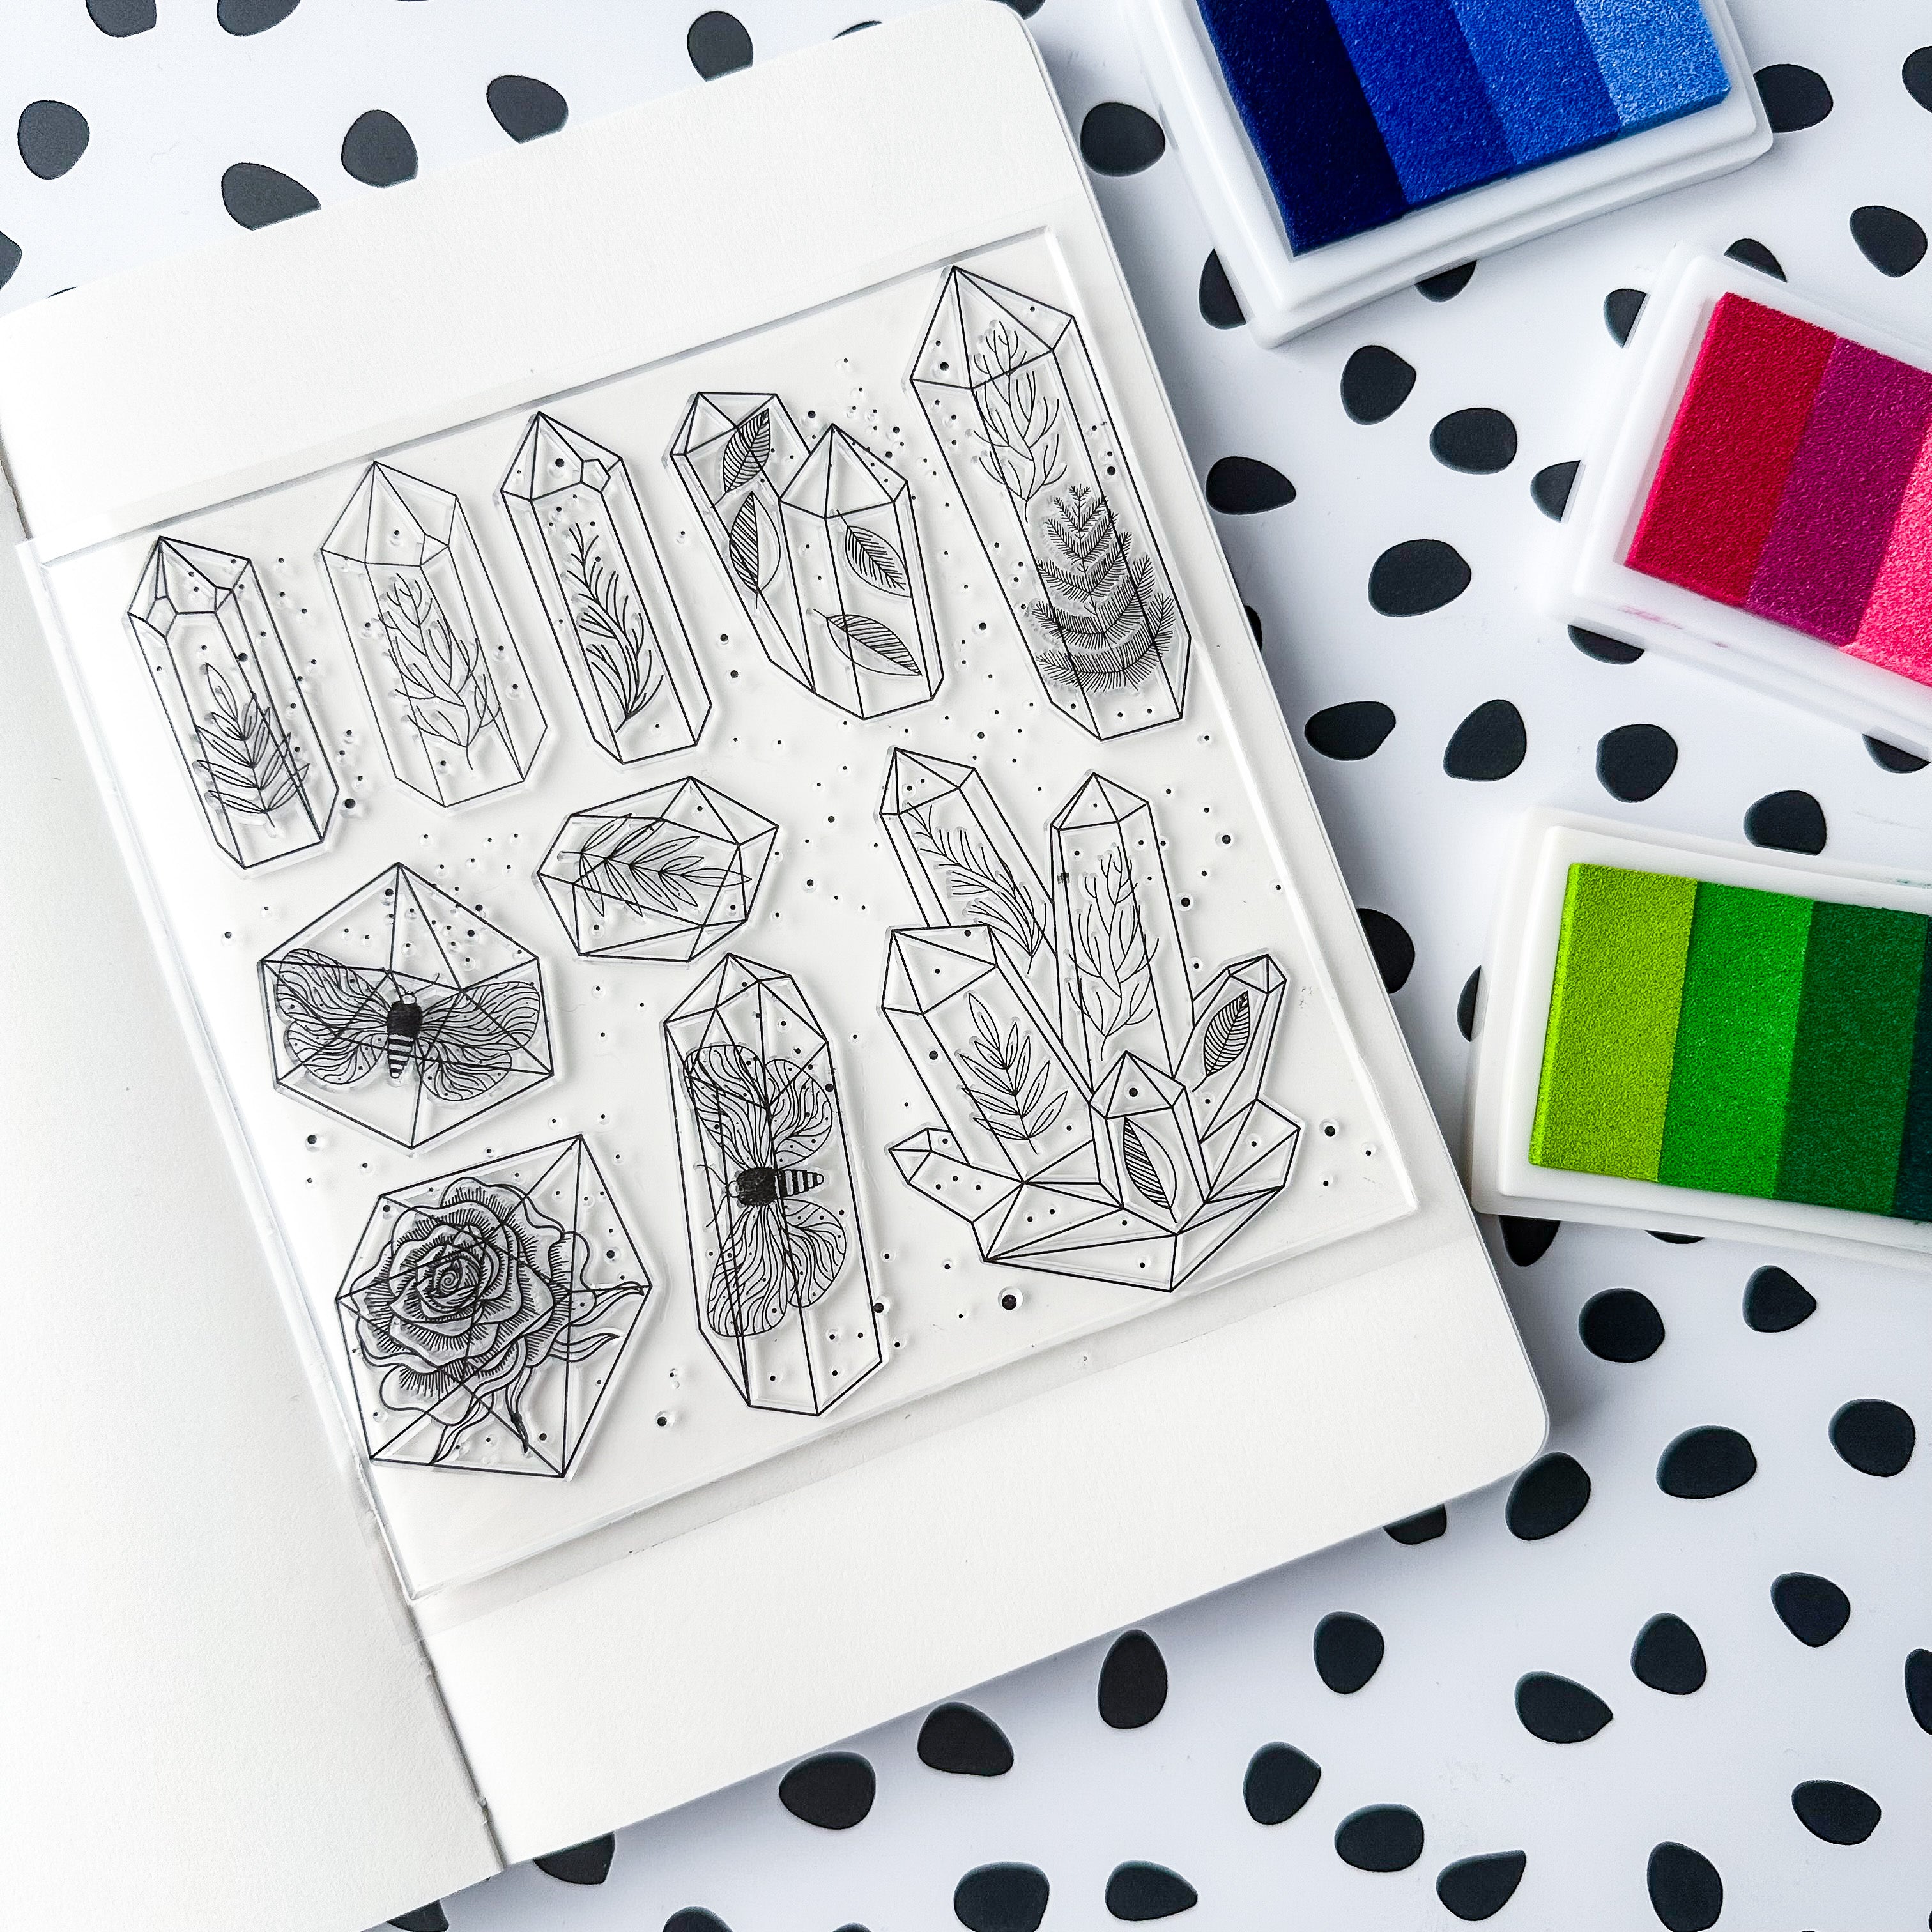 Add a touch of natural beauty to your crafts with these crystal geode stamps. Perfect for adding a mystical and earthy vibe to your journals, scrapbooks, and more! This stamp set is sold at BBB Supplies Craft Shop.